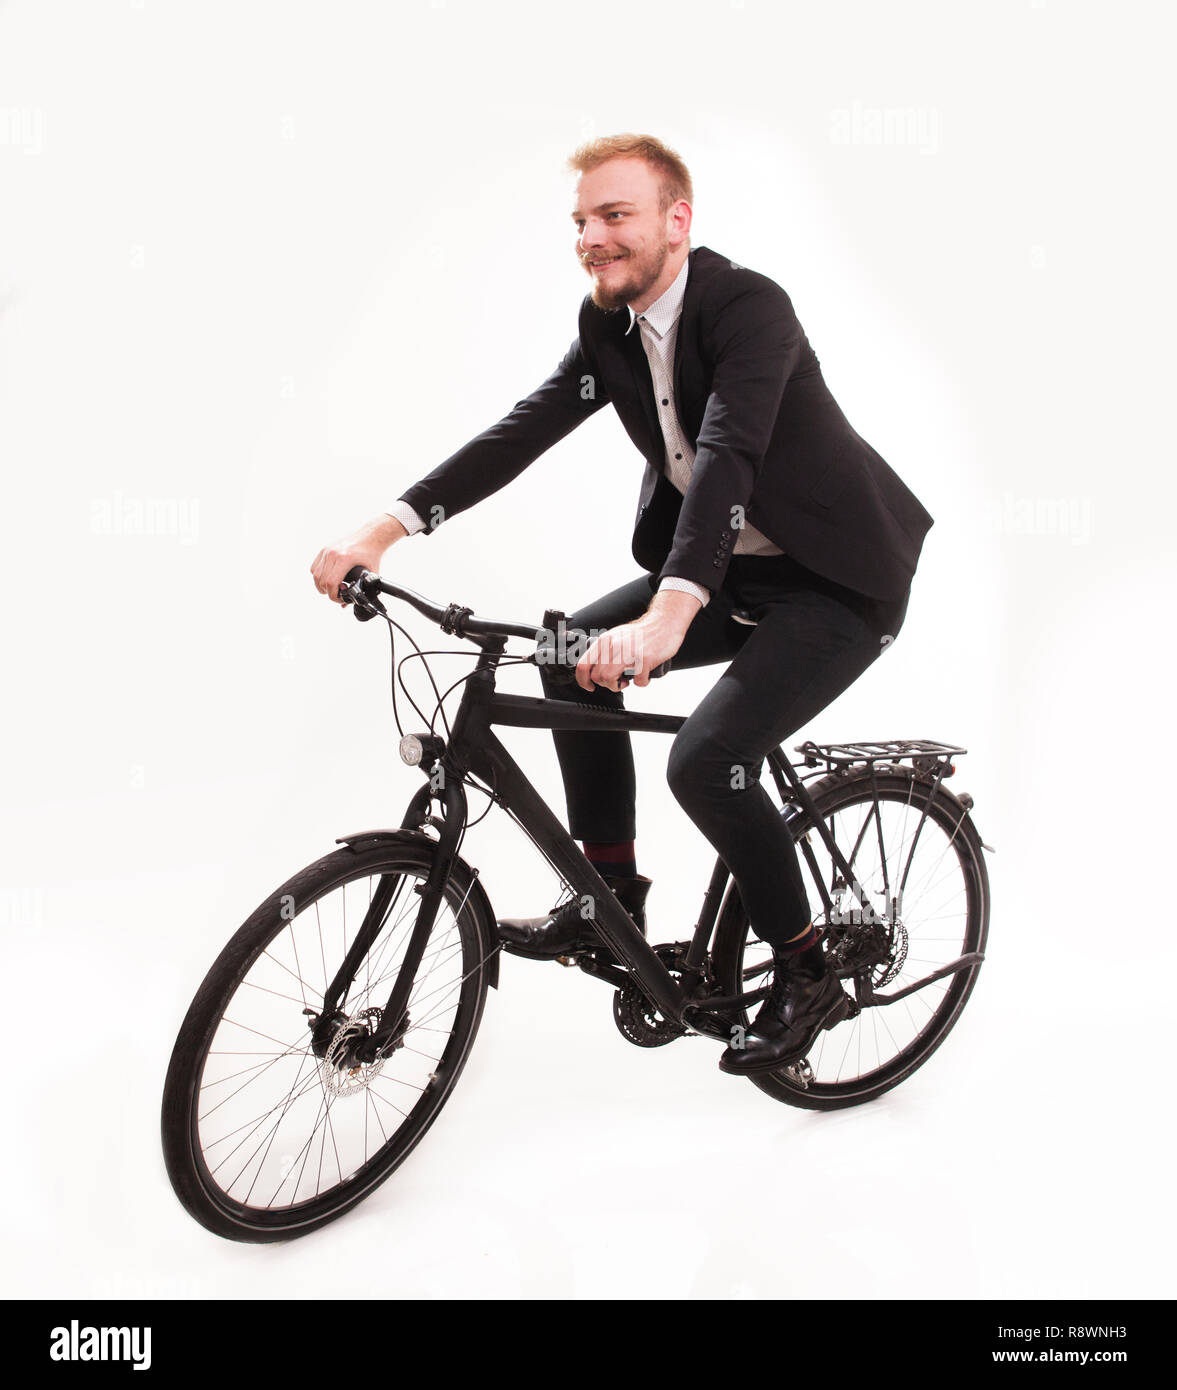 one young smiling man, 20-29 years, dressed in suit, formal wear. sitting on a bike, cycling in studio on isolated white background. Stock Photo